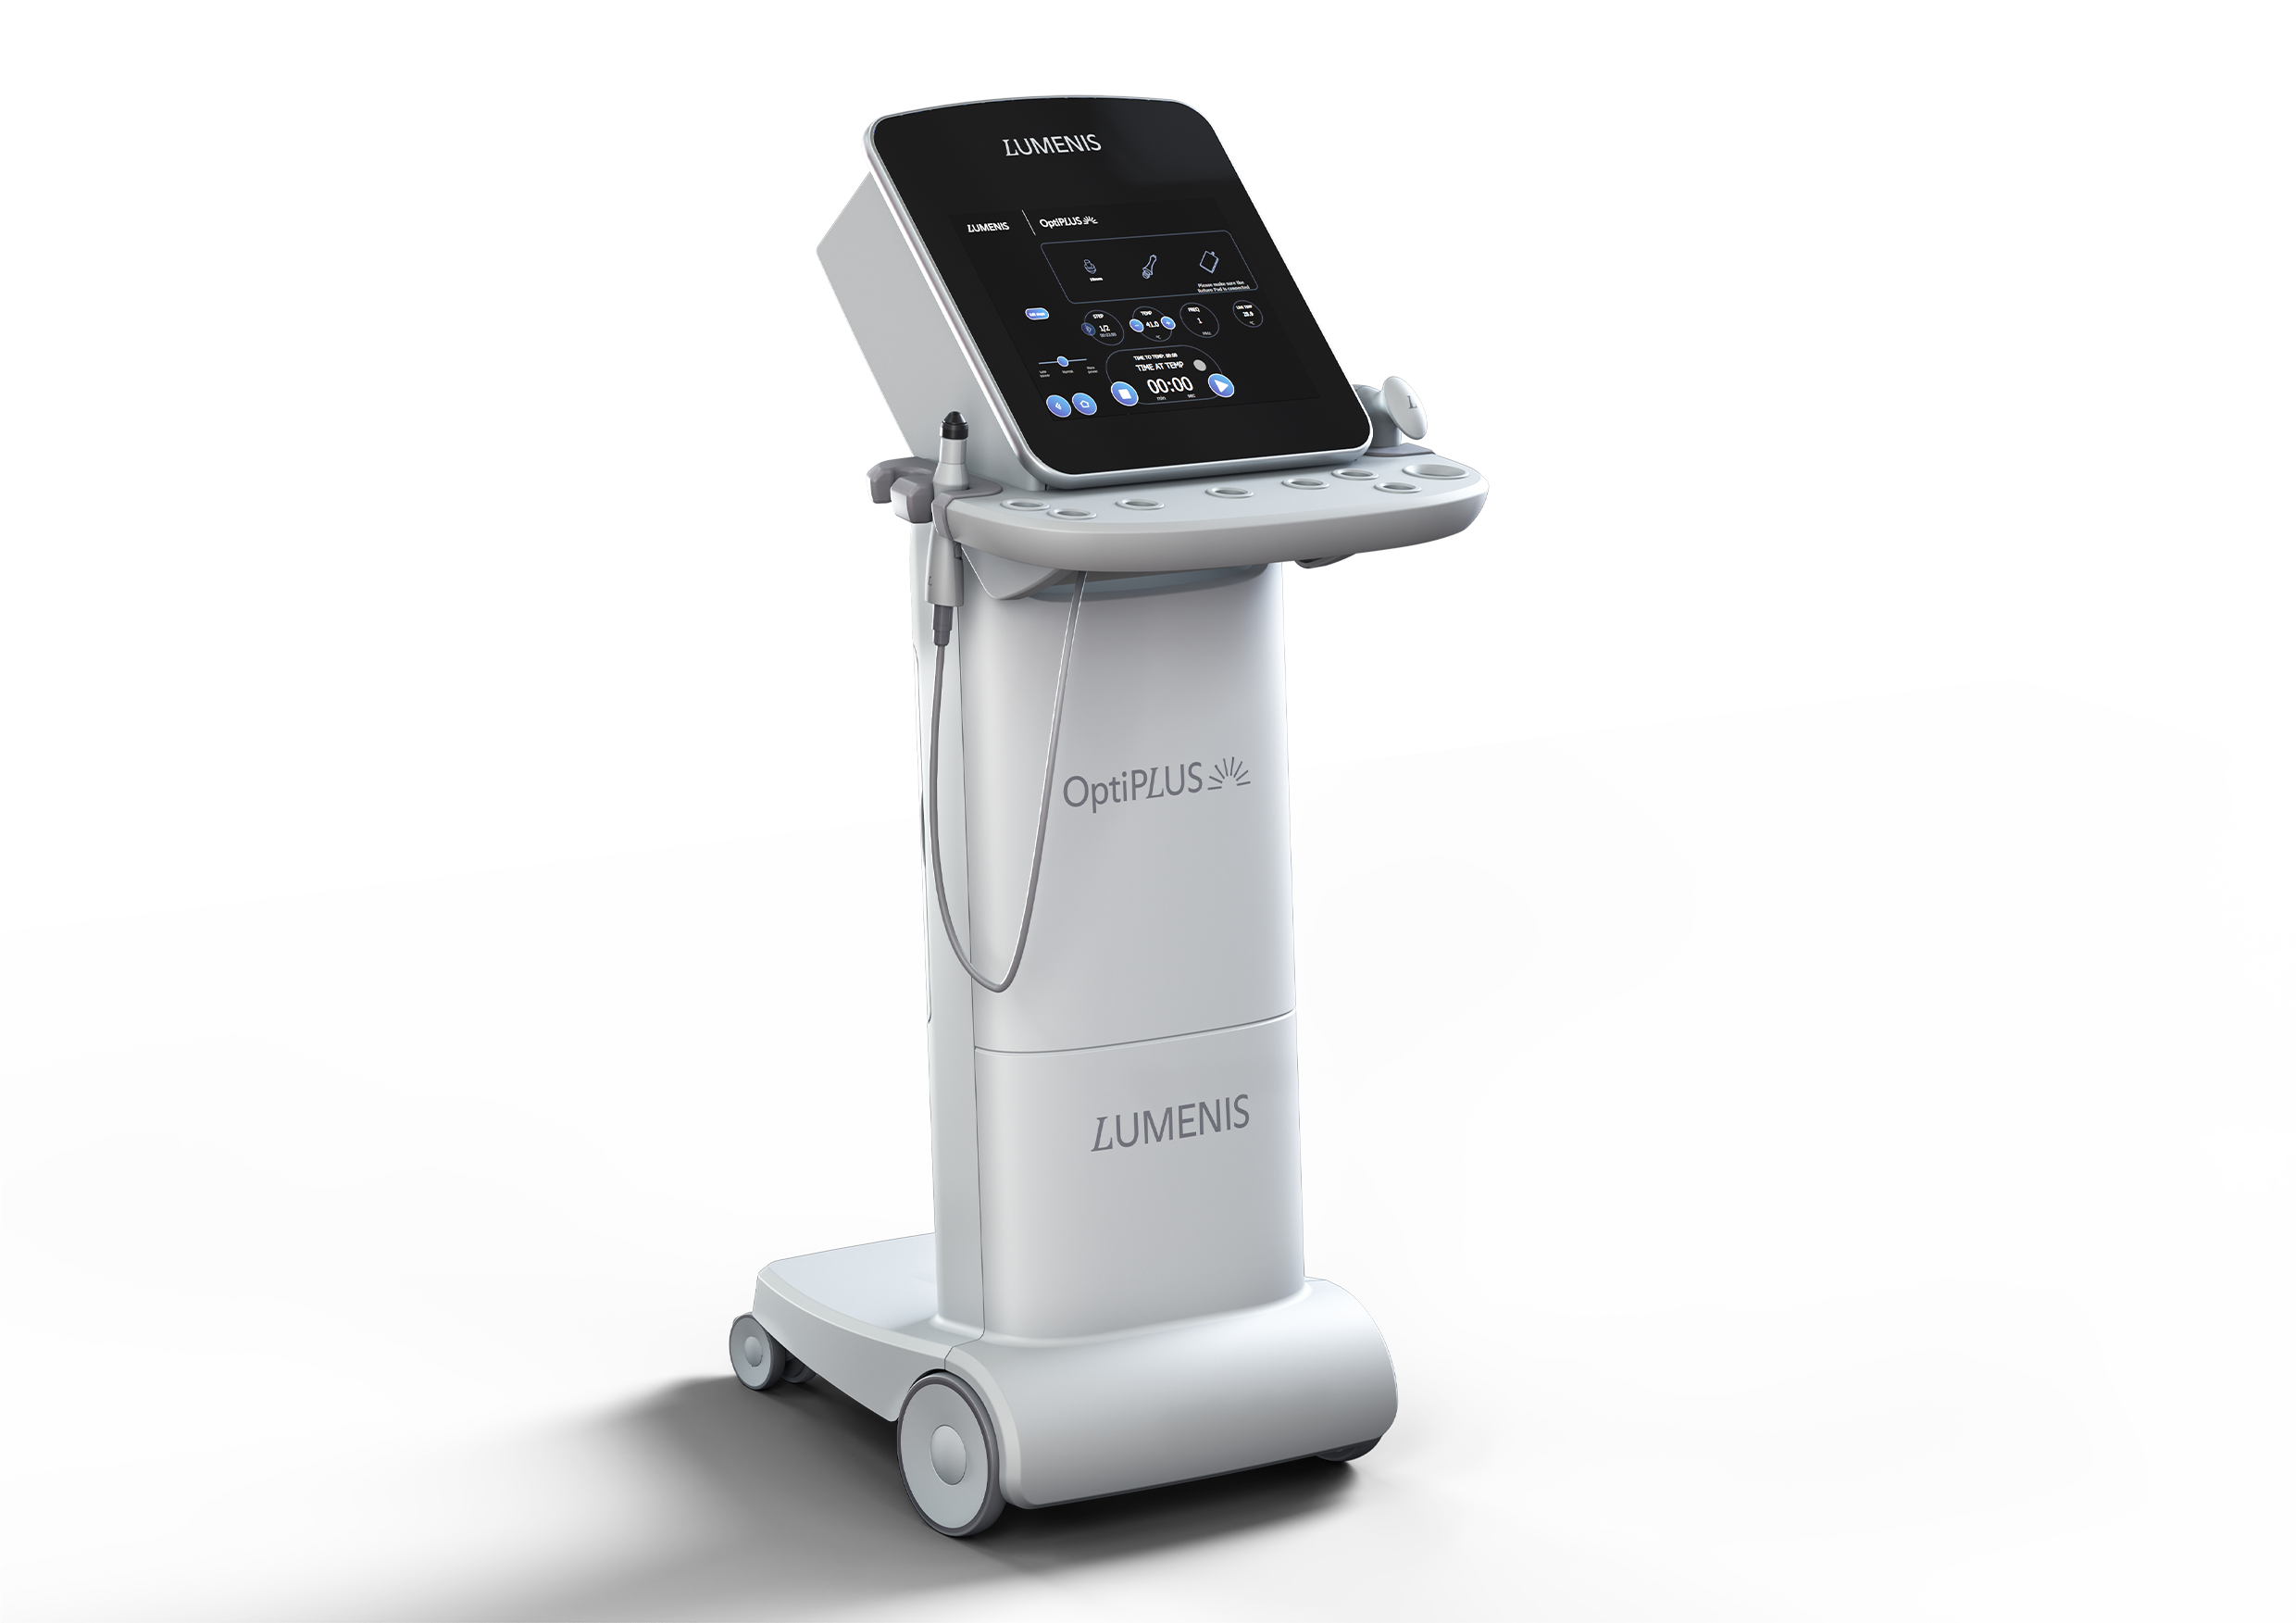 The OptiPlus radio frequency device from Lumenis is designed for both the treatment of MGD and for aesthetic applications, such as to reduce fine lines and wrinkles.